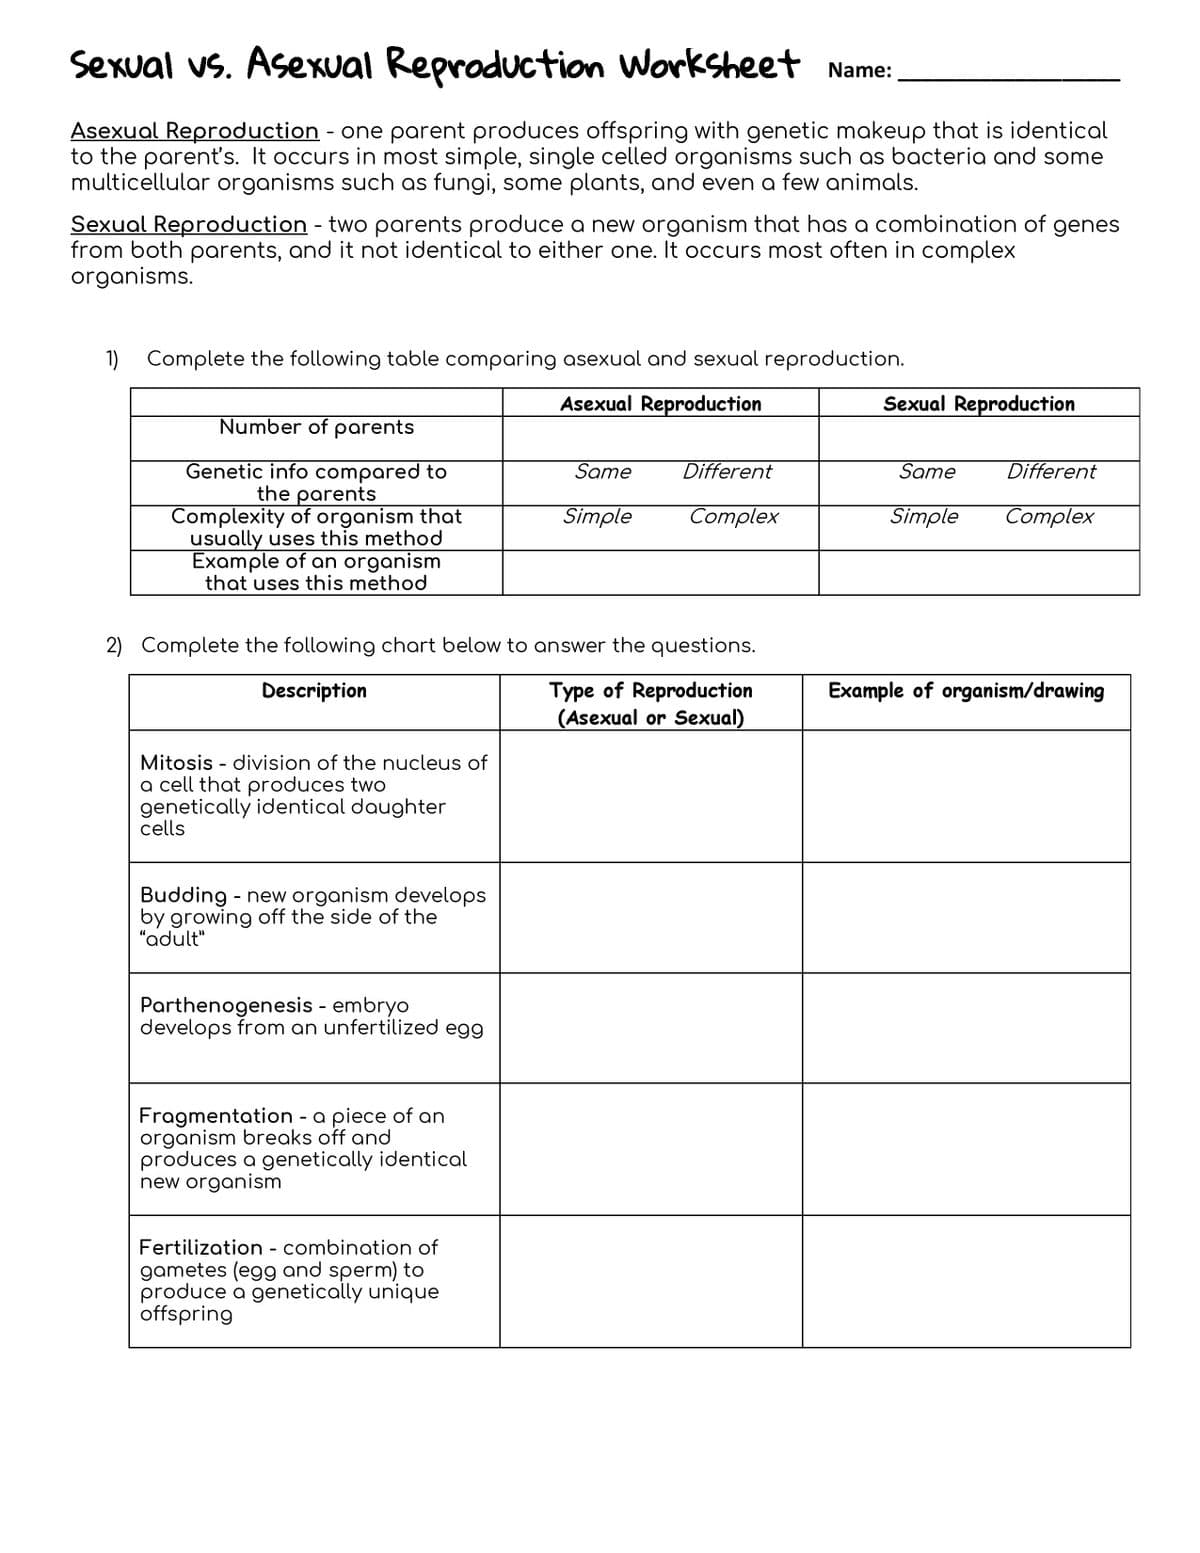 Sexual vs. Asexual Reproduction Worksheet Name:
Asexual Reproduction - one parent produces offspring with genetic makeup that is identical
to the parent's. It occurs in most simple, single celled organisms such as bacteria and some
multicellular organisms such as fungi, some plants, and even a few animals.
Sexual Reproduction - two parents produce a new organism that has a combination of genes
from both parents, and it not identical to either one. It occurs most often in complex
organisms.
1) Complete the following table comparing asexual and sexual reproduction.
Asexual Reproduction
Sexual Reproduction
Number of parents
Genetic info compared to
the parents
Complexity of organism that
usually uses this method
Example of an organism
that uses this method
Same
Different
Same
Different
Simple
Complex
Simple
Complex
2) Complete the following chart below to answer the questions.
Type of Reproduction
(Asexual or Sexual)
Description
Example of organism/drawing
Mitosis - division of the nucleus of
a cell that produces two
genetically identical daughter
cells
Budding - new organism develops
by growing off the side of the
"adult"
Parthenogenesis - embryo
develops from an unfertilized egg
Fragmentation - a piece of an
organism breaks off and
produces a genetically identical
new organism
Fertilization - combination of
gametes (egg and sperm) to
produce a genetically unique
offspring
